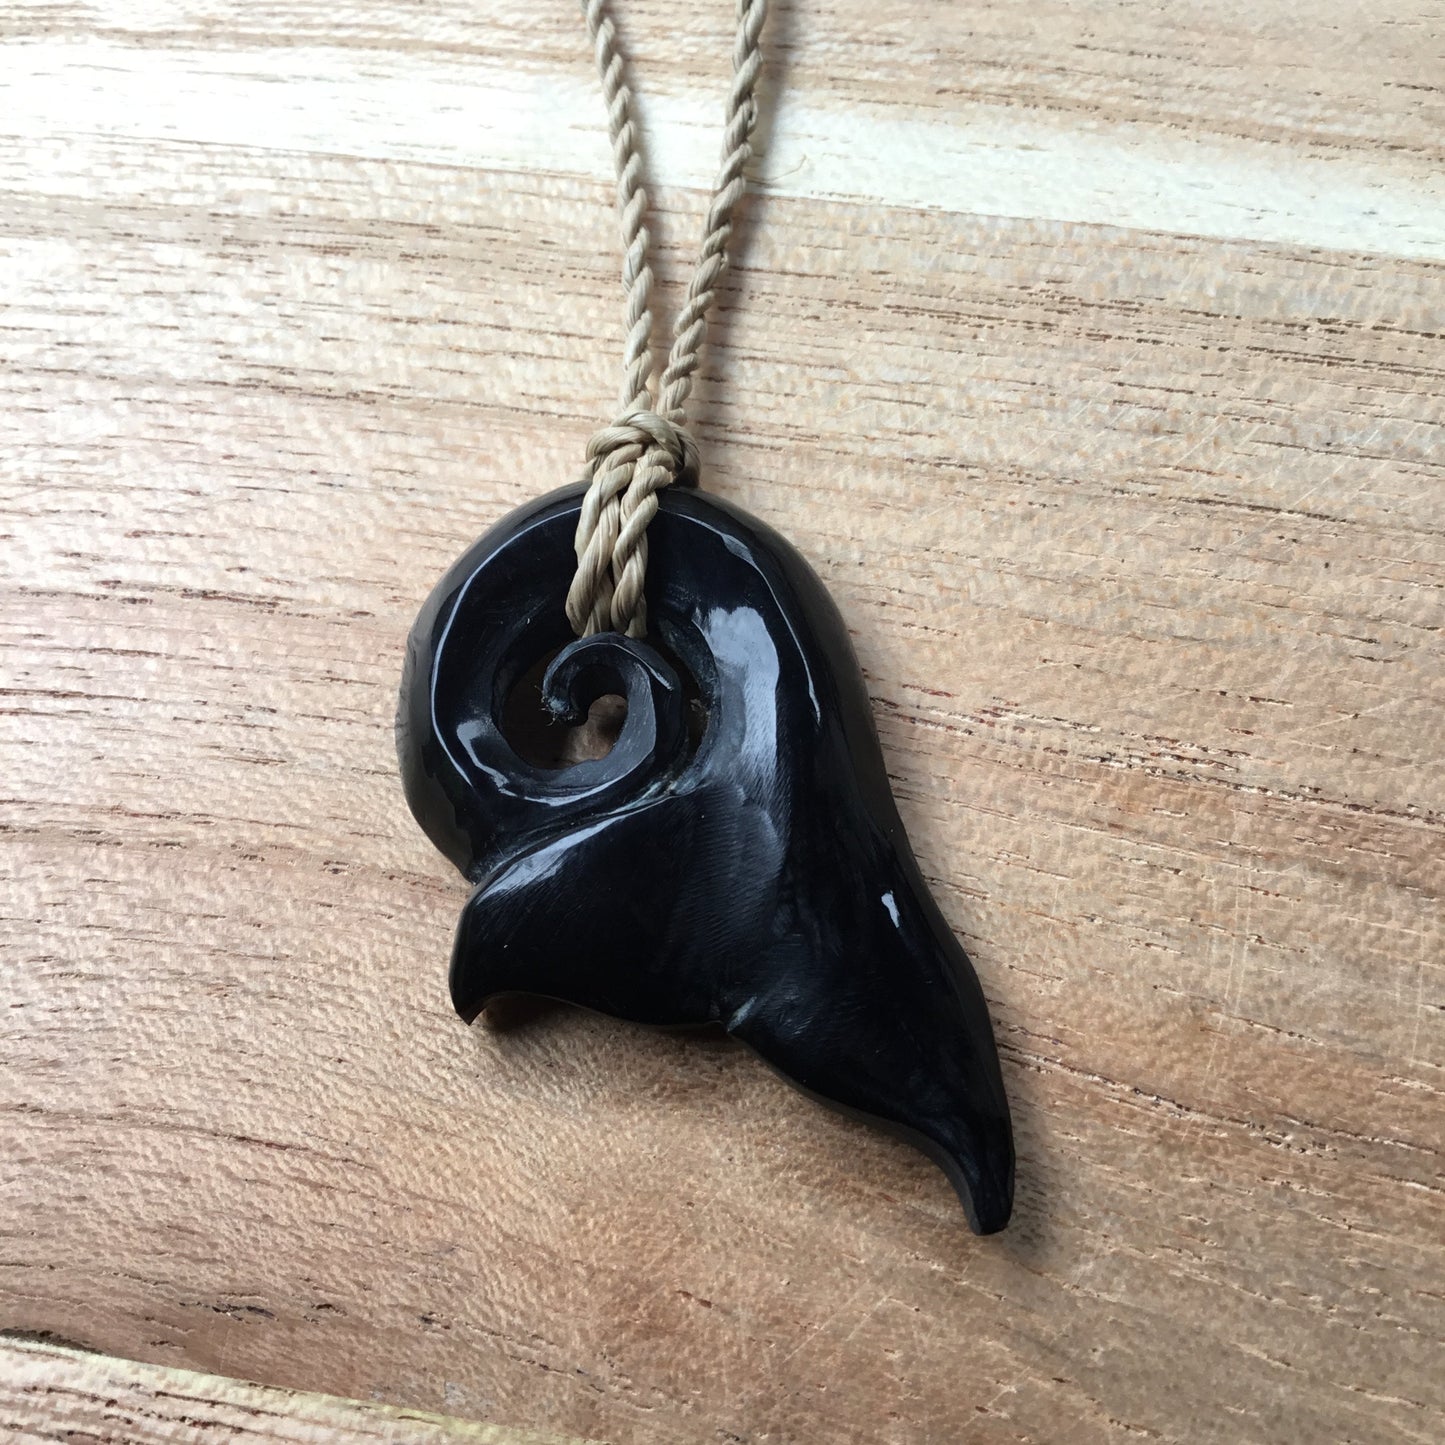 Hawaiian carved whale necklace.